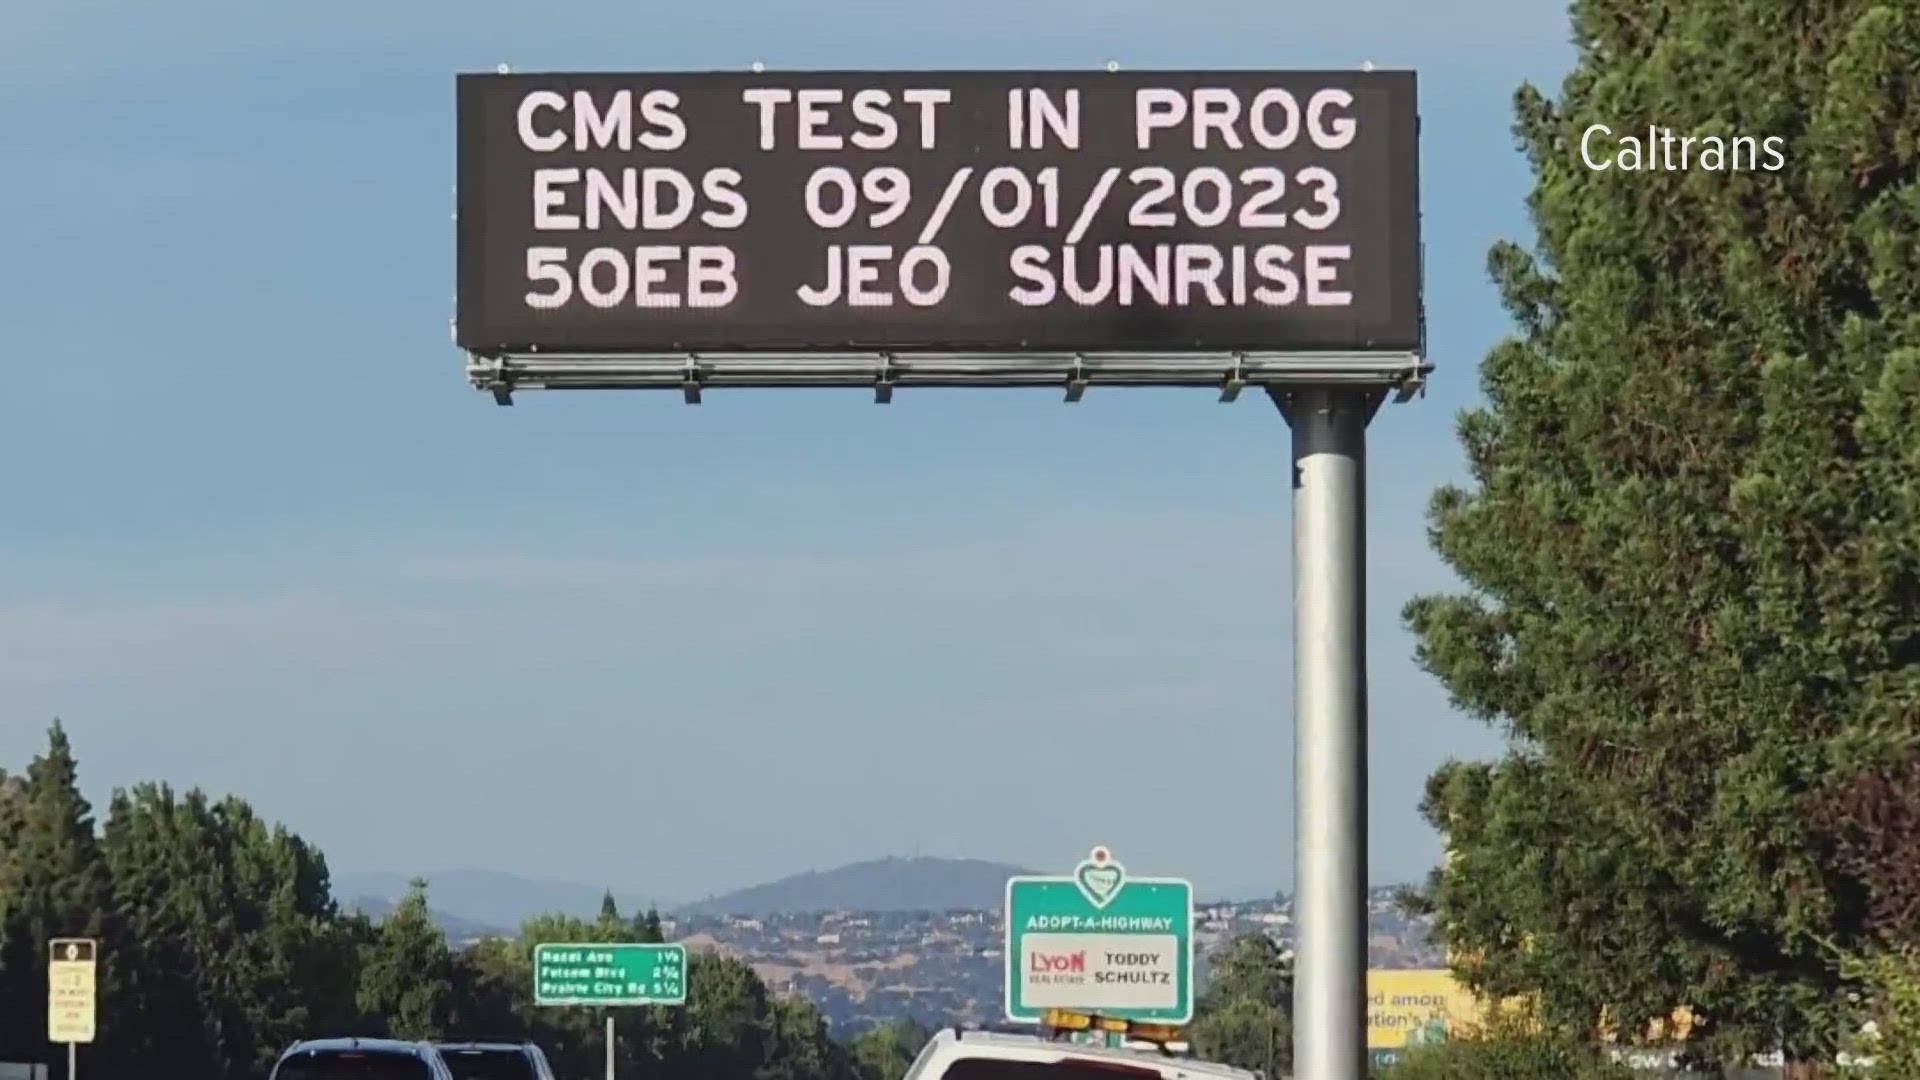 Before going live in mid-September, drivers may see a message reading “CMS Test in Prog(ress); Ends 09/01/2023” on these new boards.